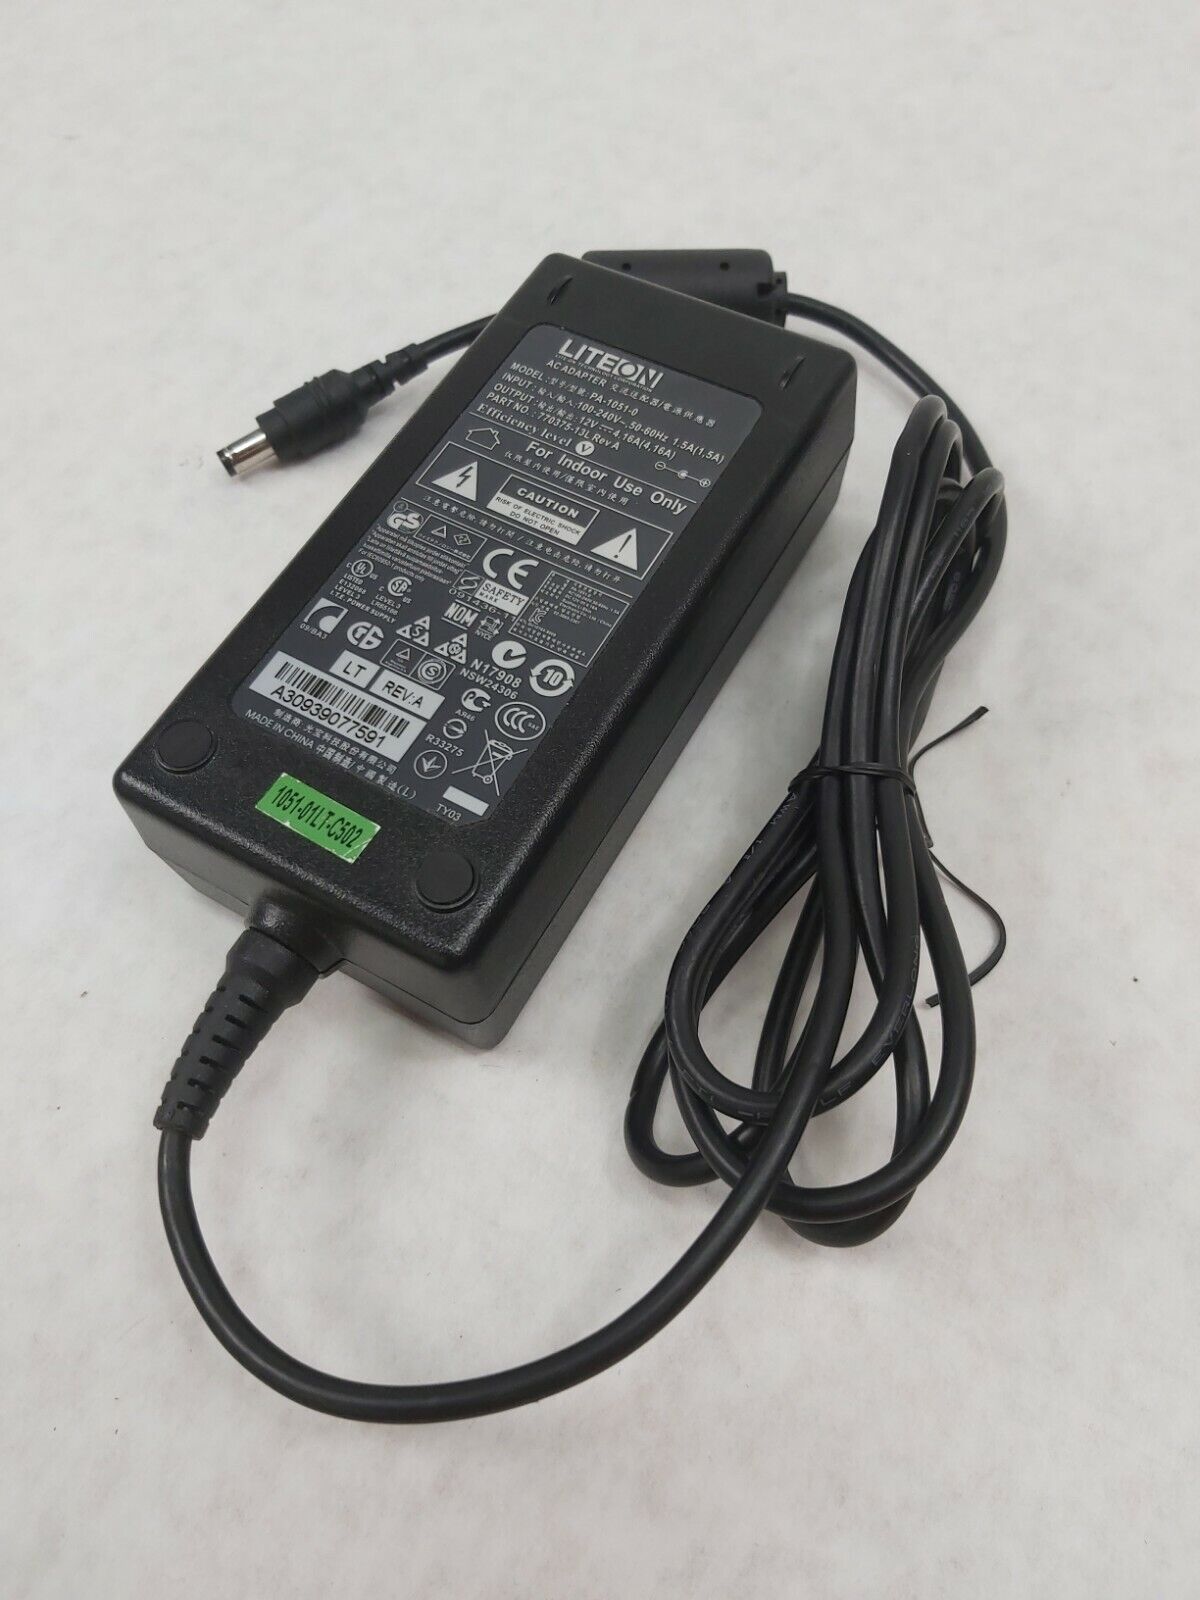 Liteon Power Supply AC Adapter PA-1051-0 770375-13L 60W 12V 4.16A UNTESTED